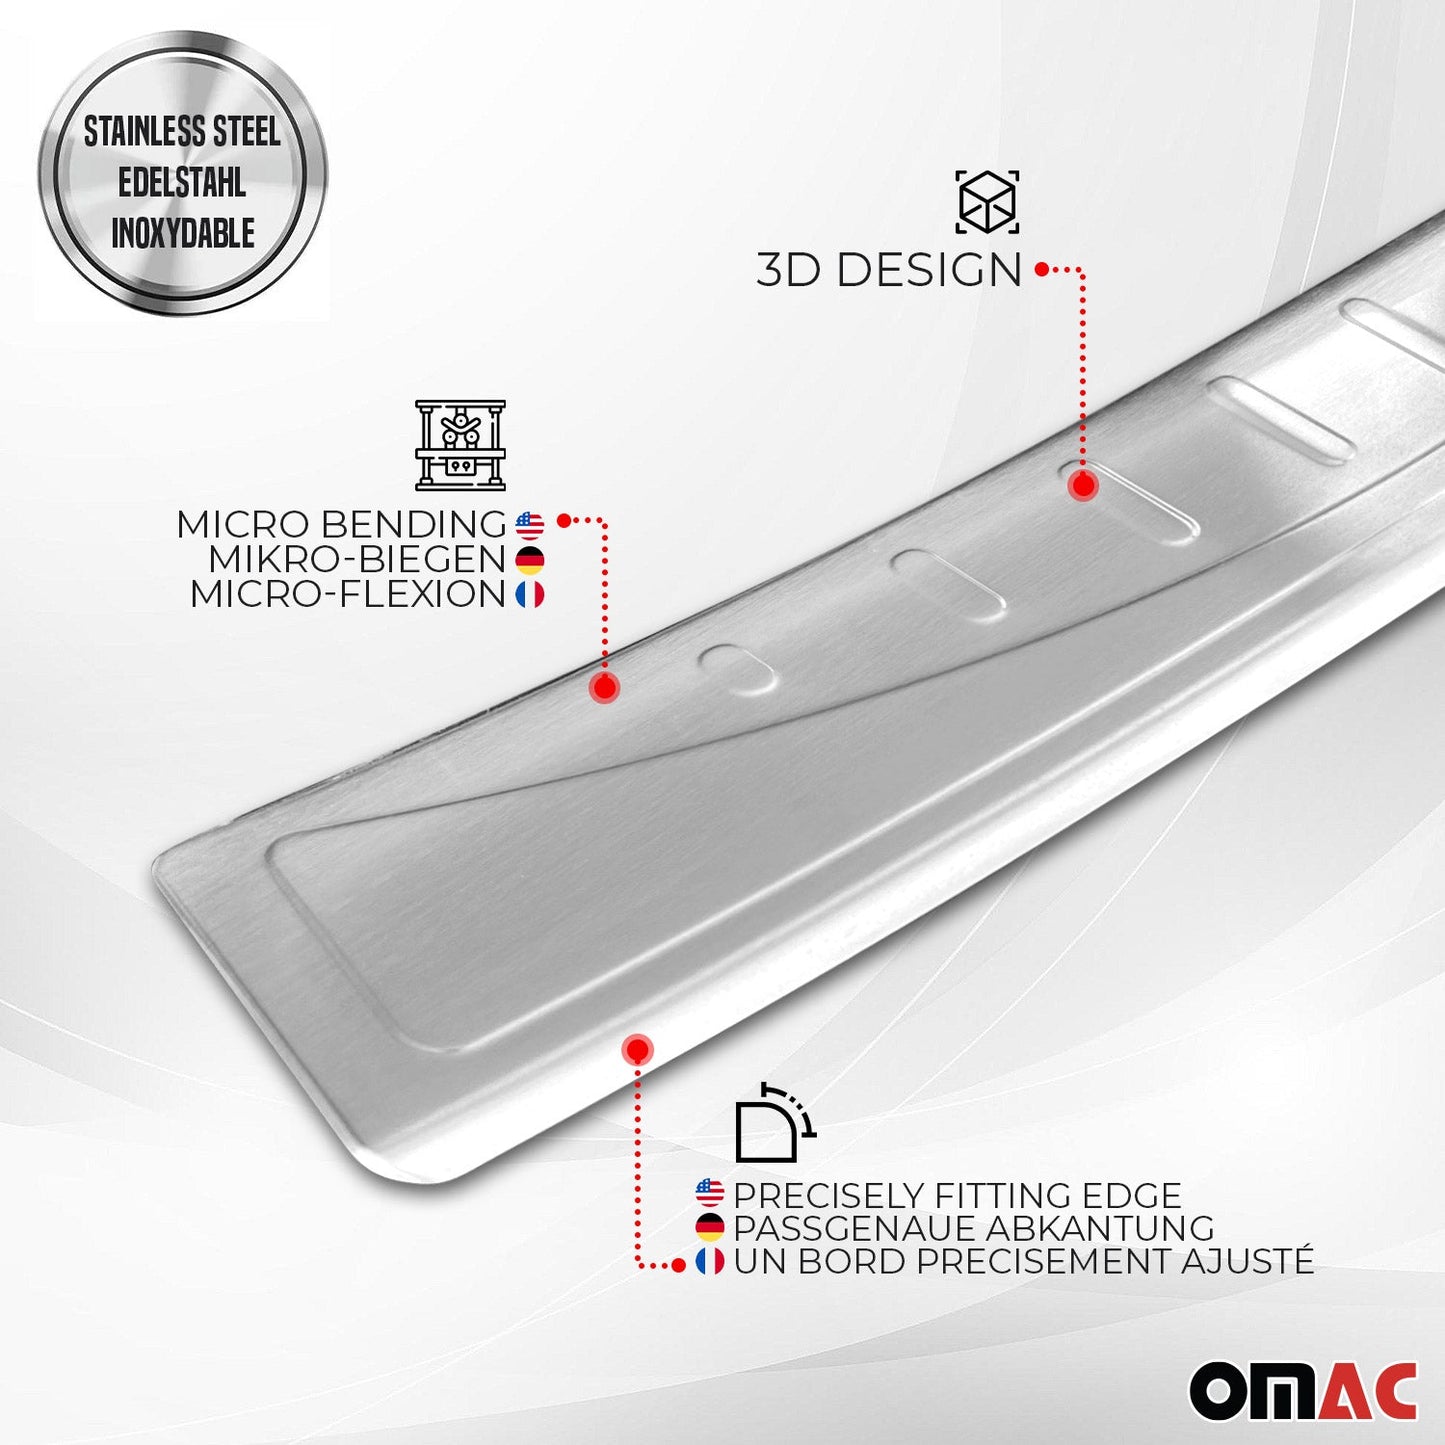 OMAC Rear Bumper Sill Cover Protector Guard for Dodge Nitro 2007-2012 Brushed Steel 2401093T